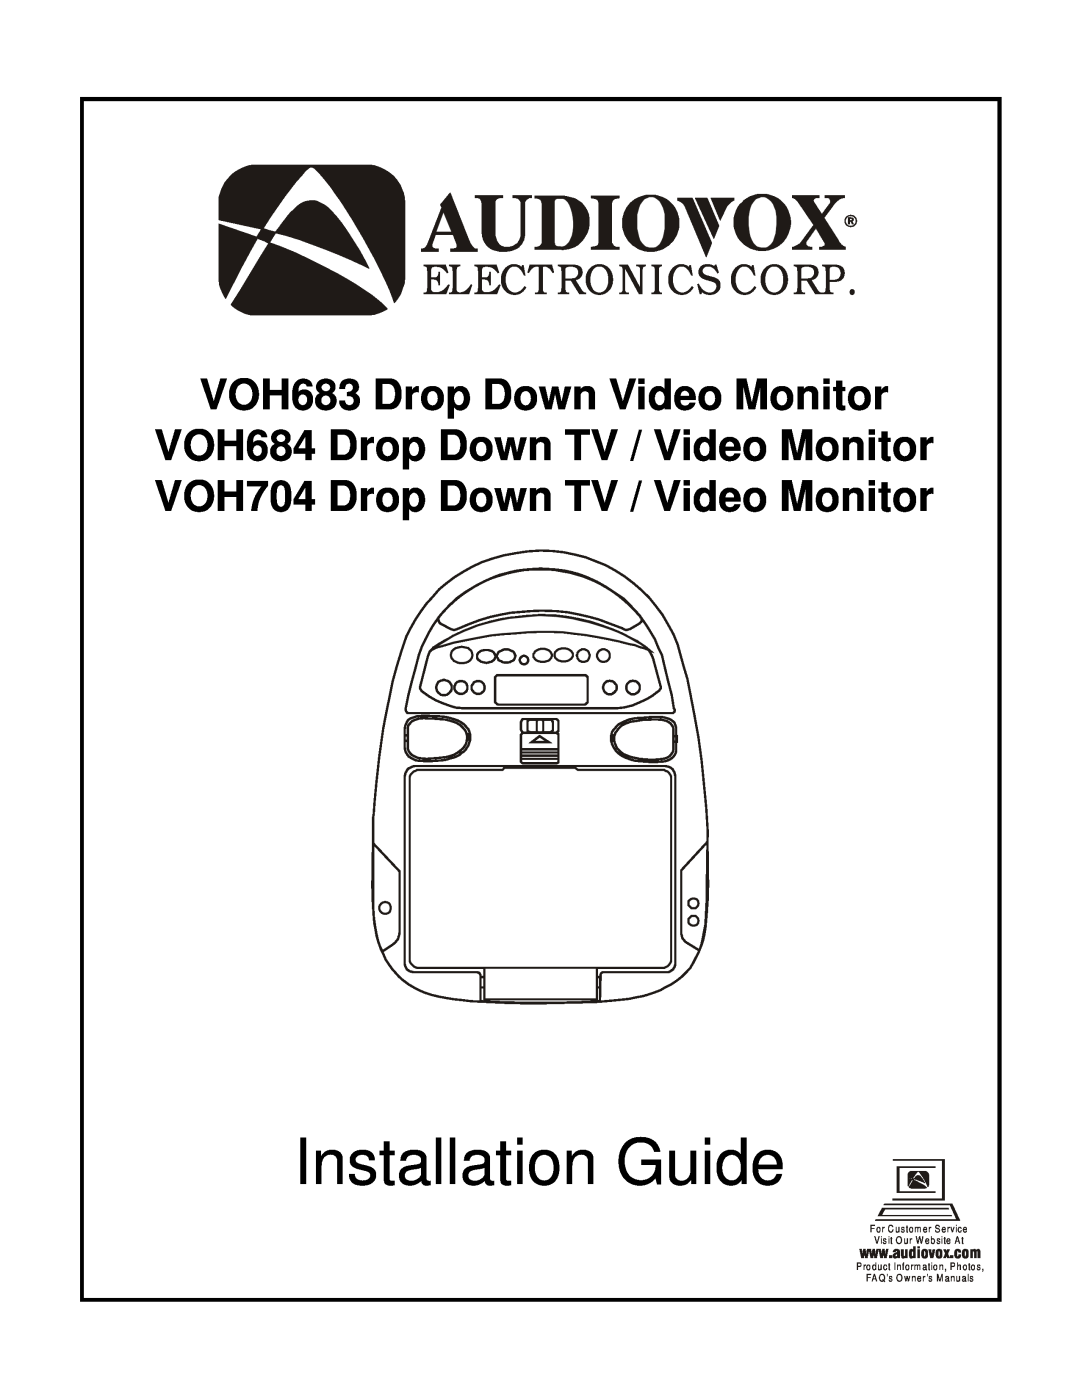 Audiovox VOH704 owner manual 128-6117 1 of, Electronics Corp, Released, audiovox.com 